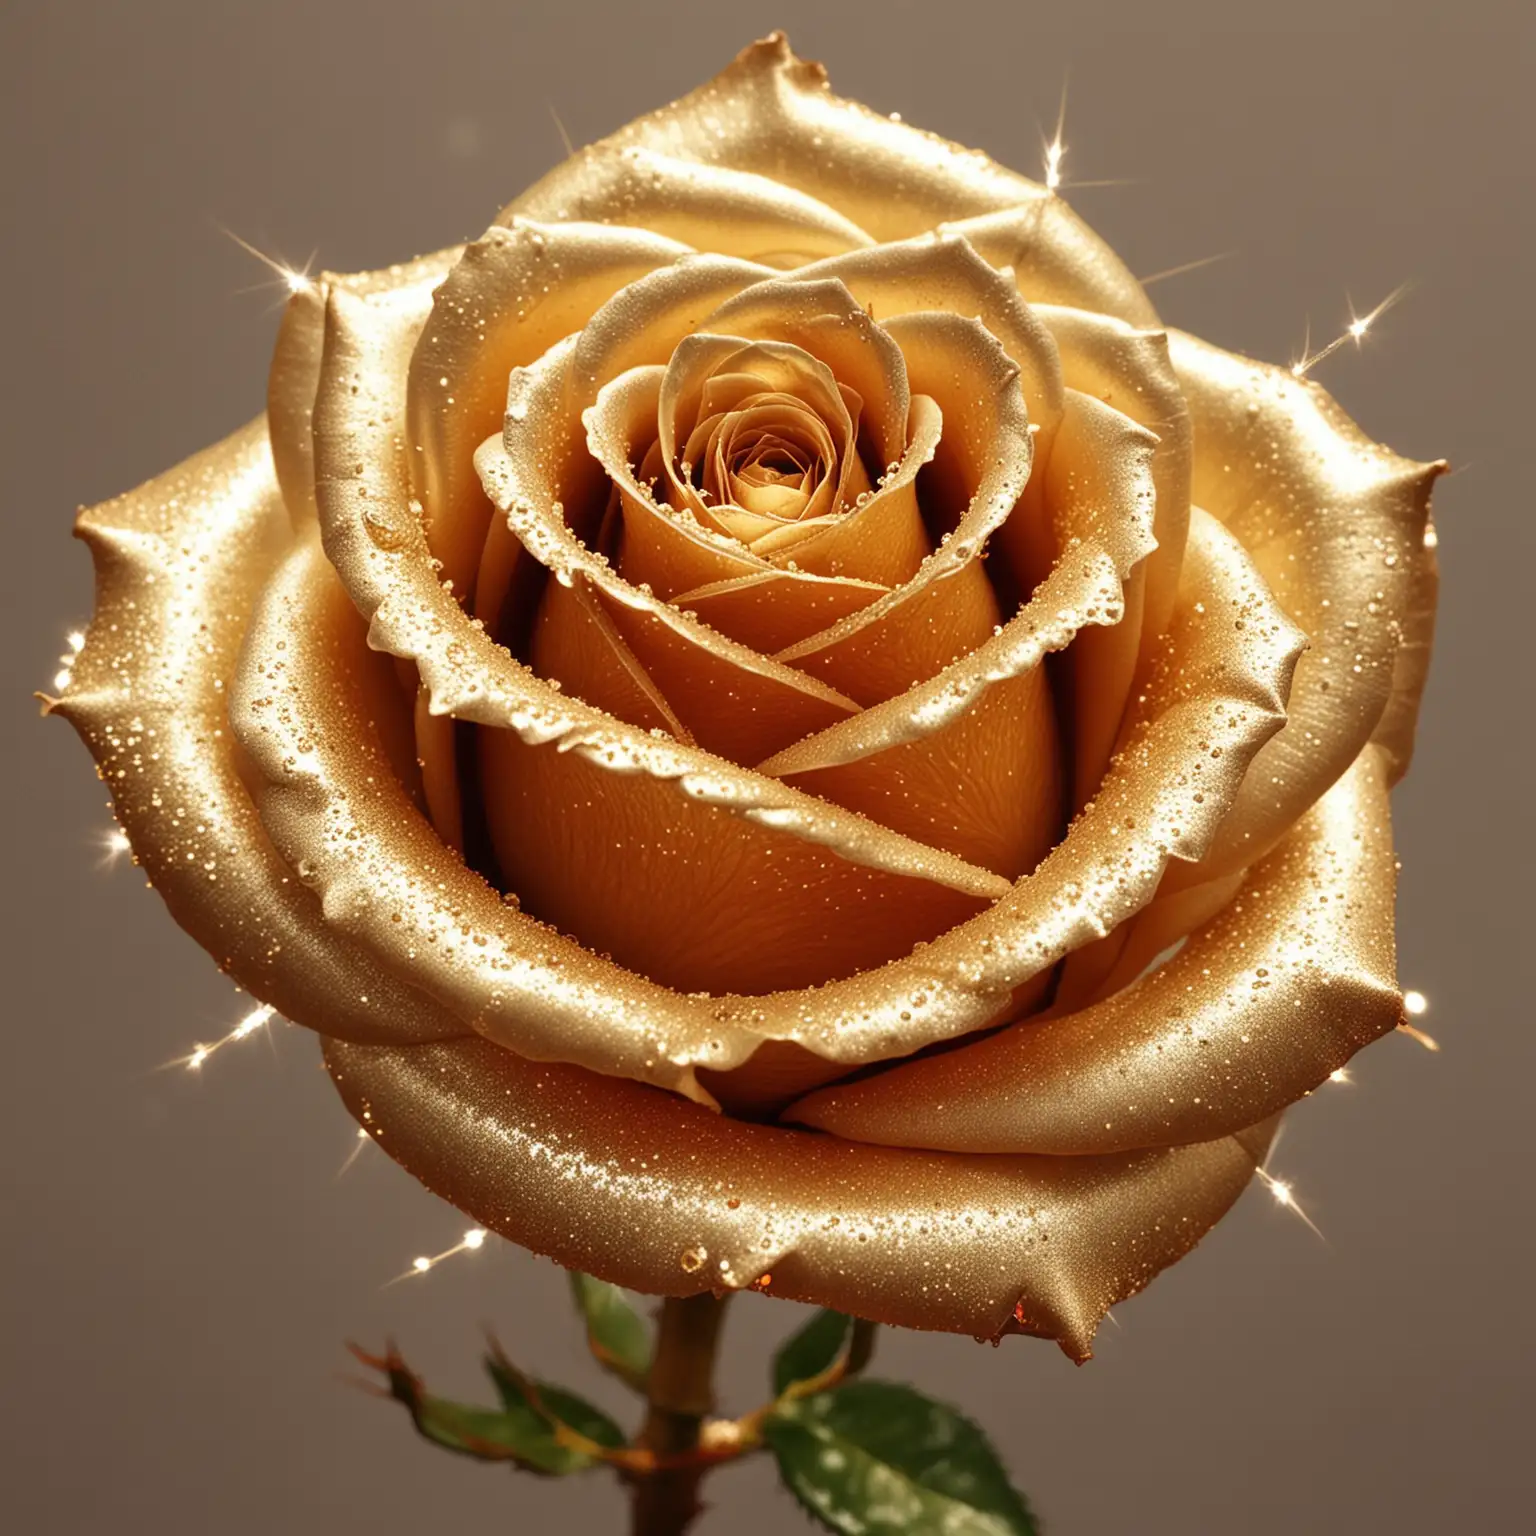 gold rose with sparkles on it